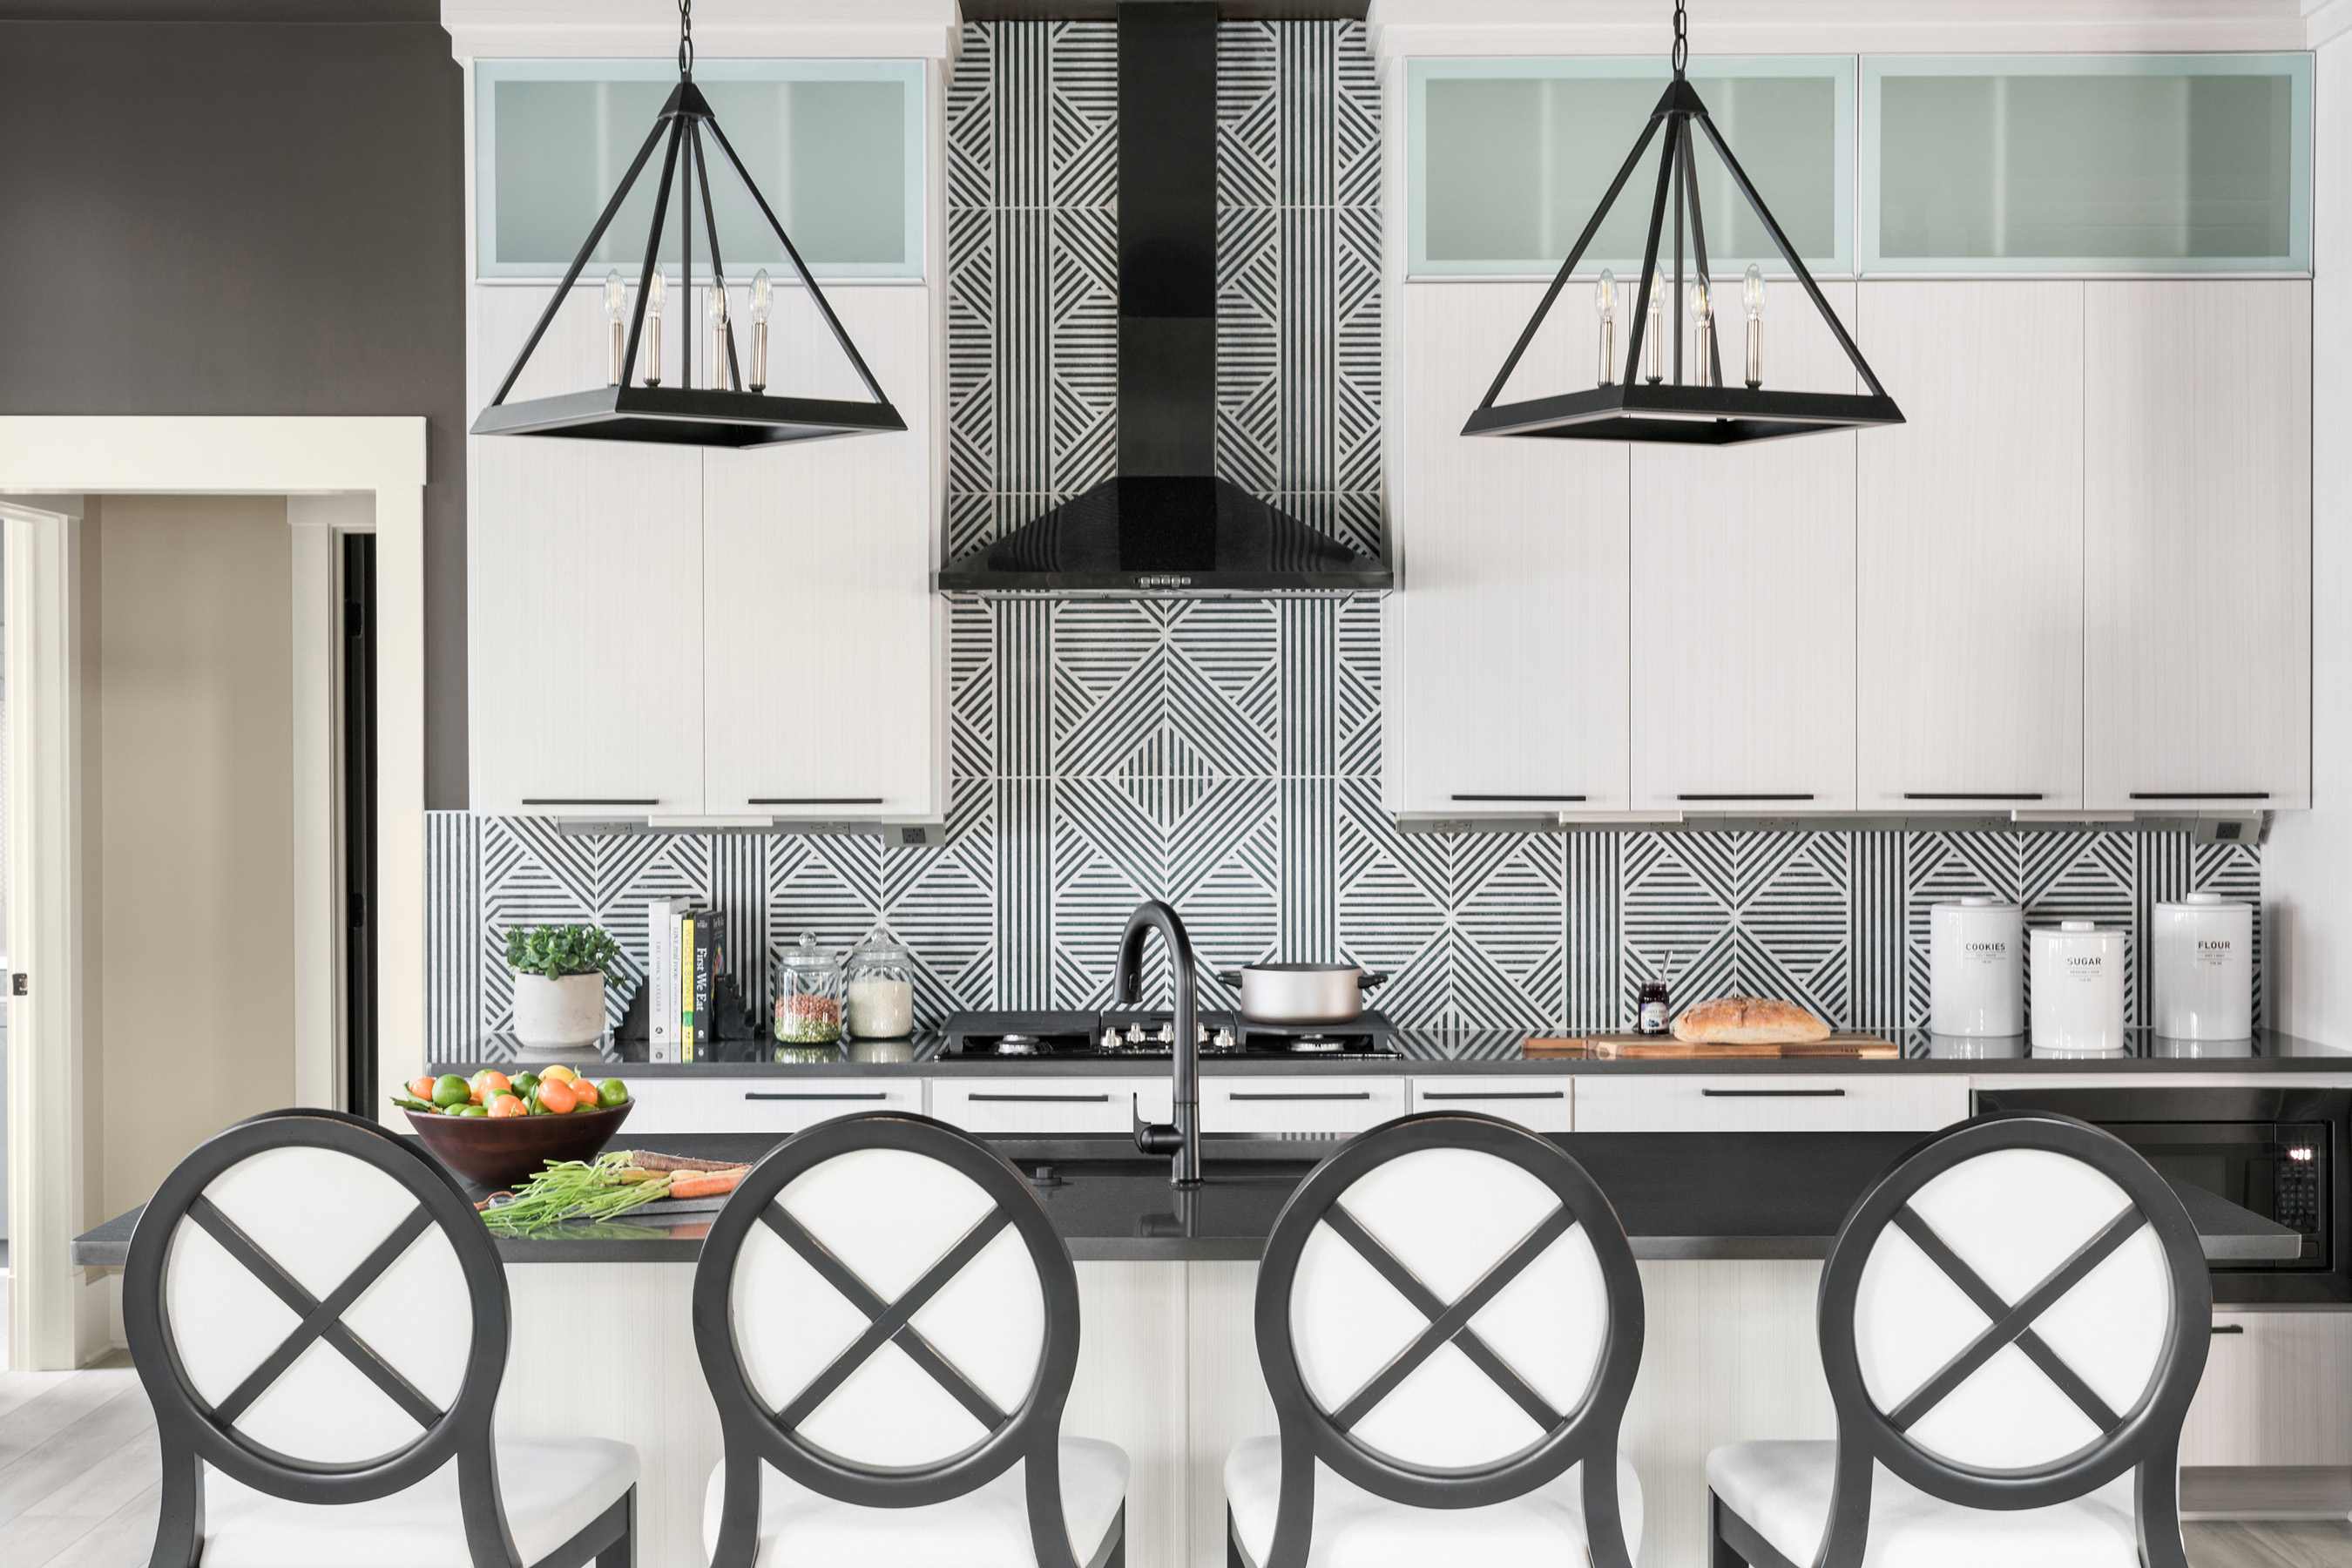 The HGTV Smart Home 2020 kitchen is a chef’s dream and includes state-of-the-art professional appliances.